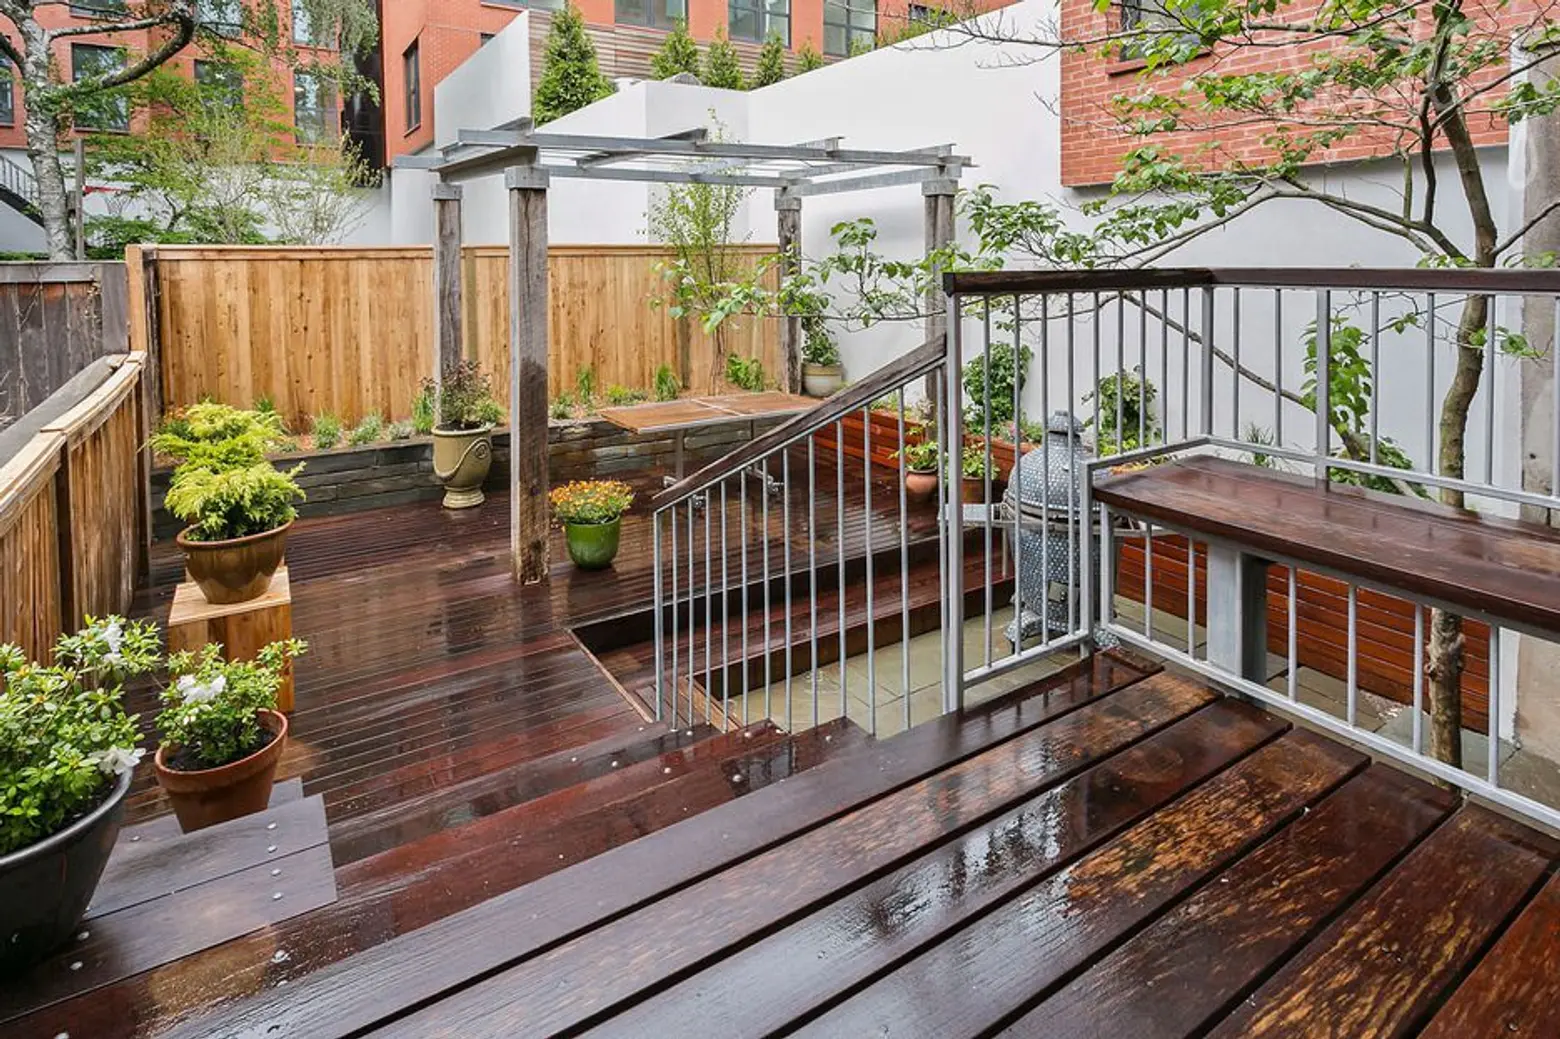 $3M Boerum Hill townhouse is ready for summer with a deck, backyard, and roof deck